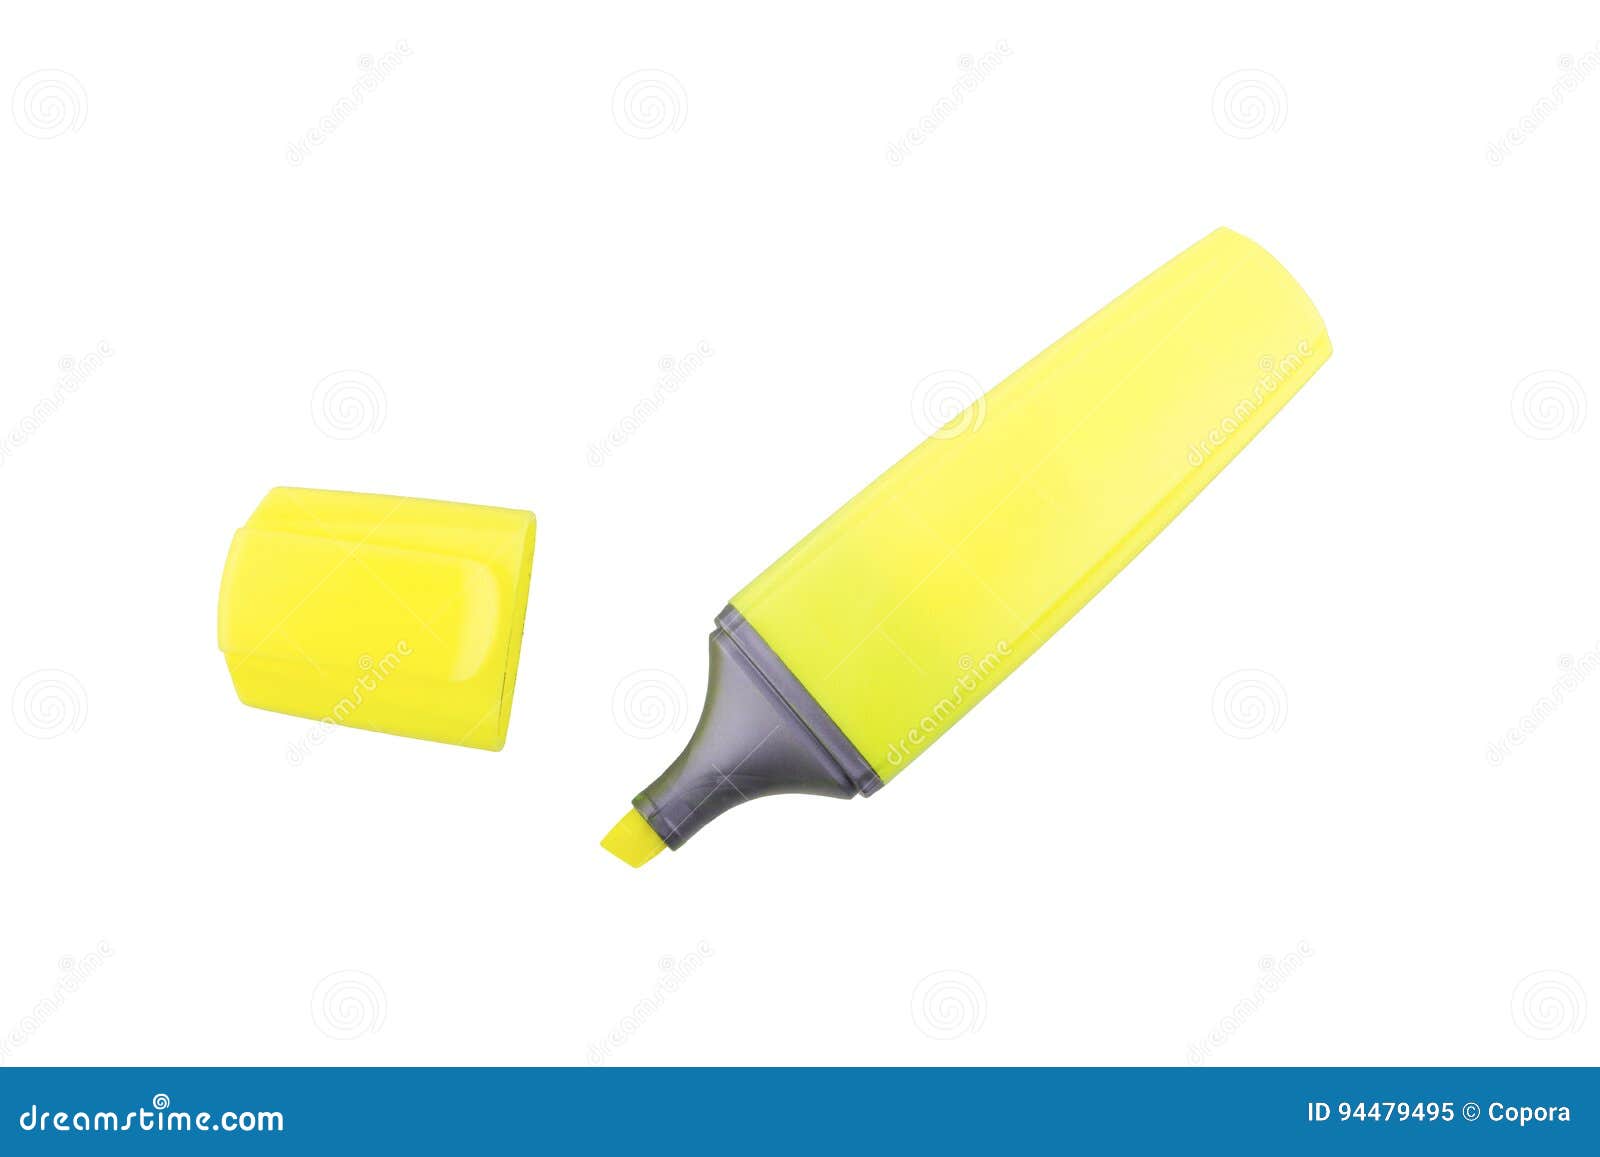 yellow highlighter over a white background